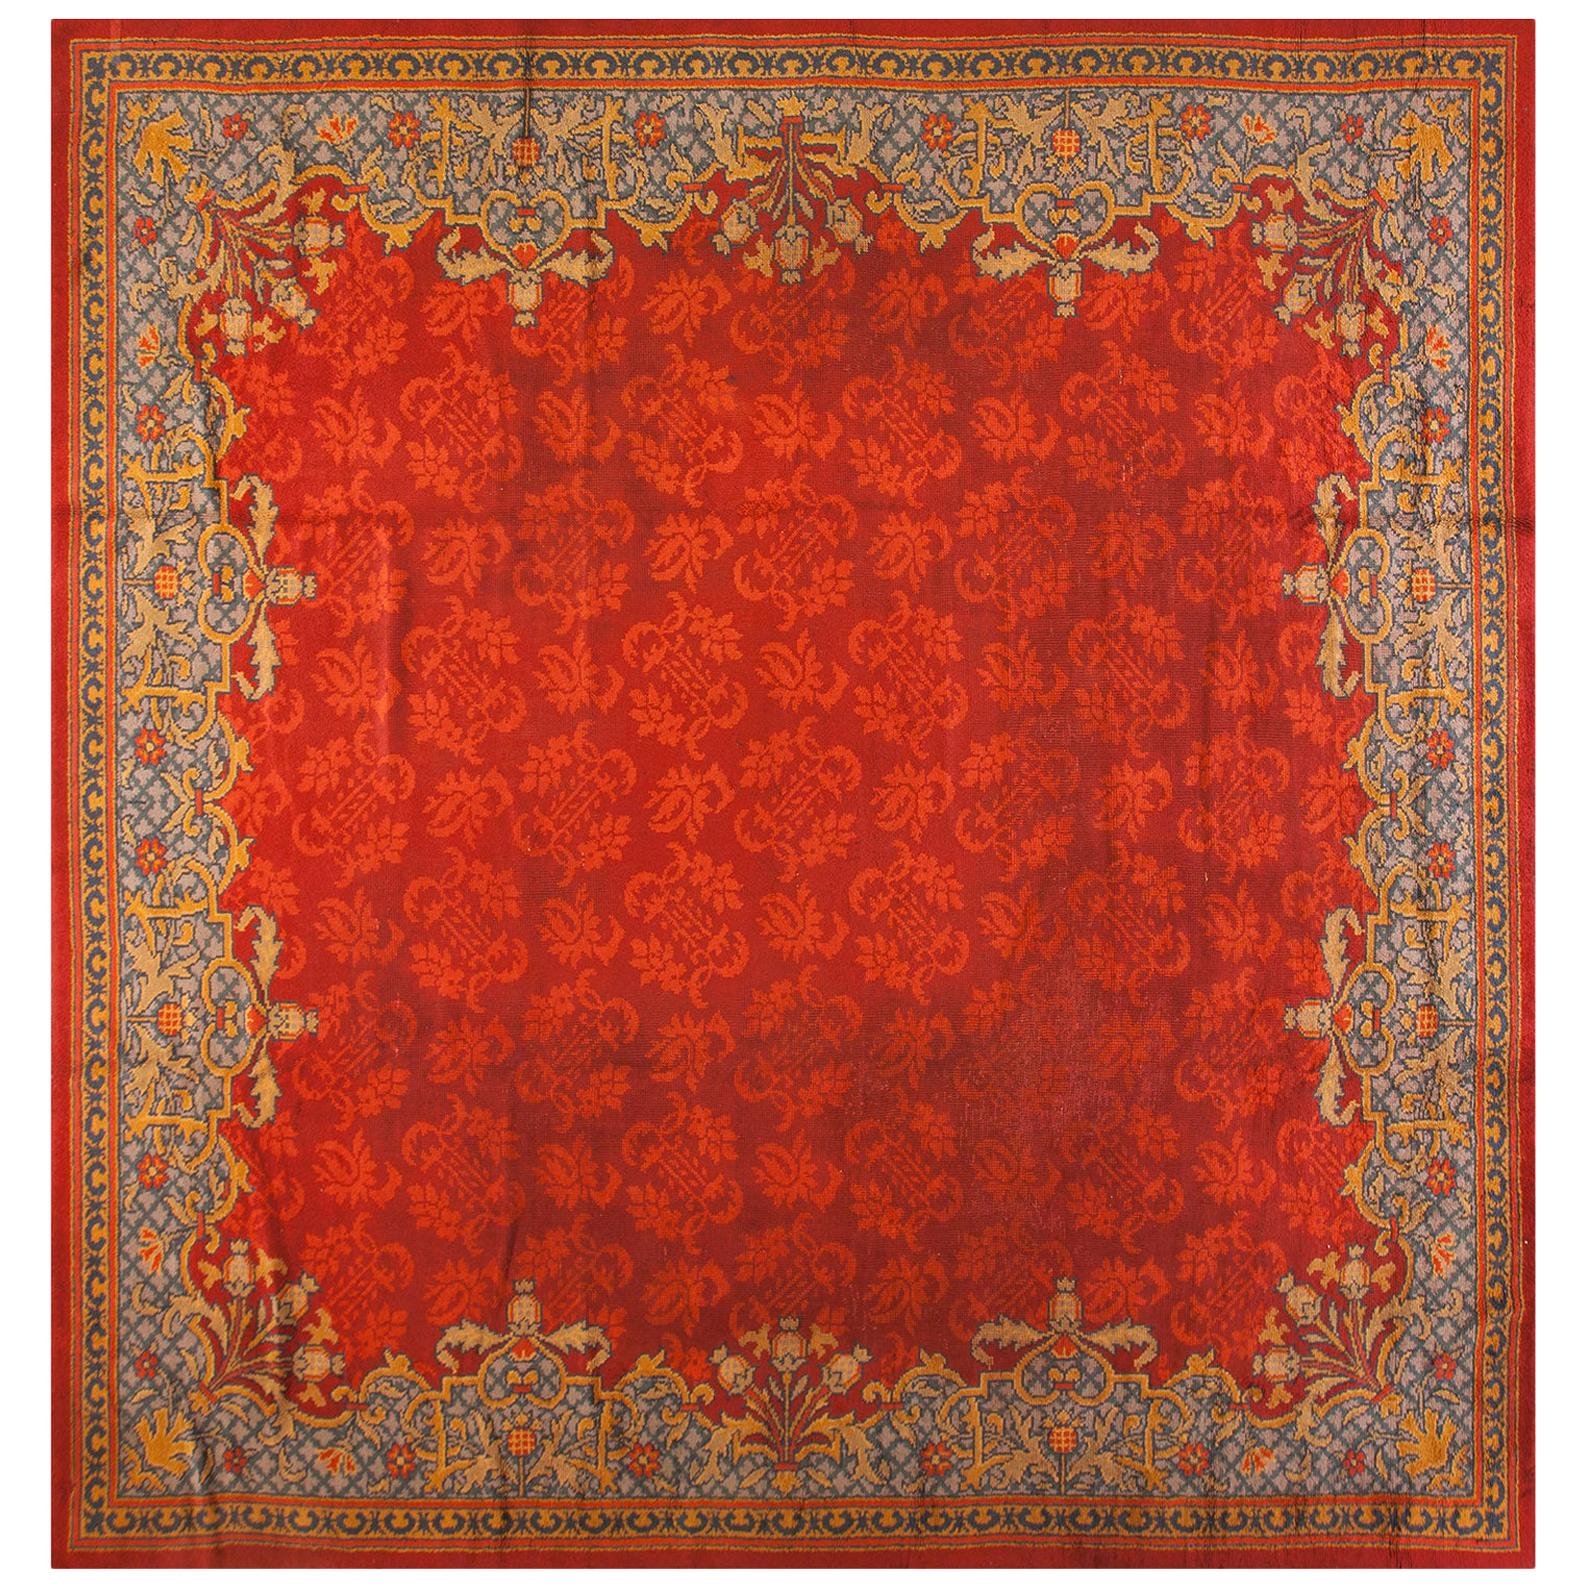 Early 20th Century English Edwardian Axminster Carpet (13'8" x 14' - 417 x 427) For Sale